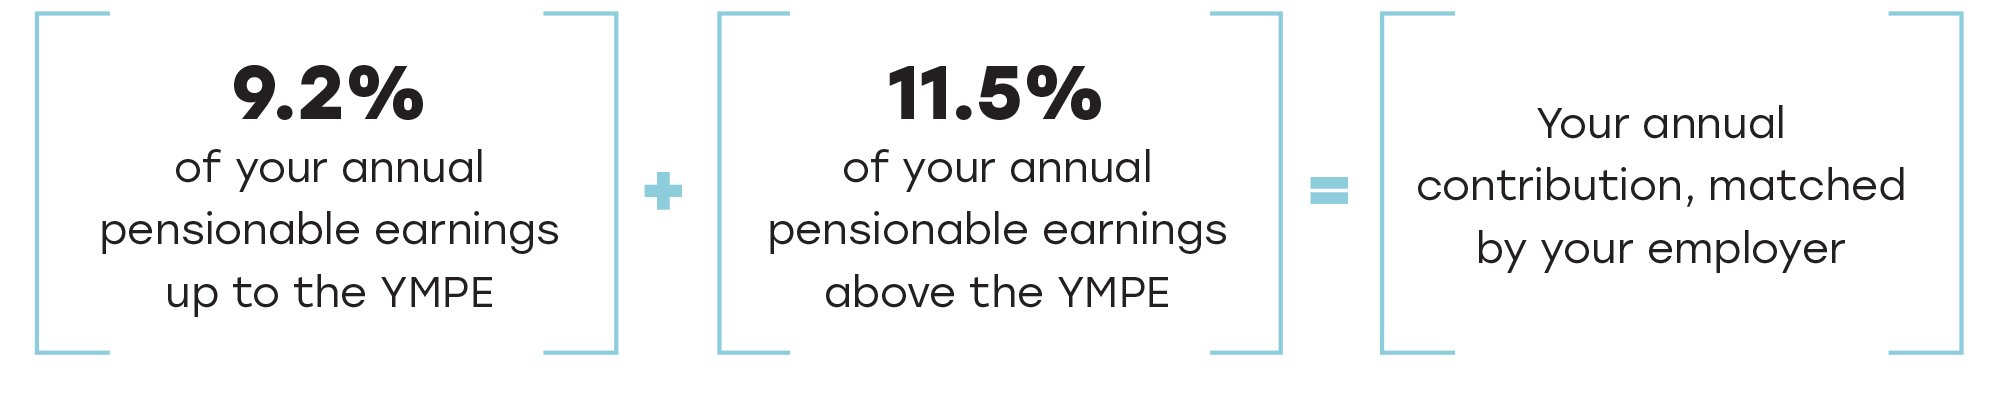 9.2% of your annual pensionable earnings up to the YMPE plus 11.5% of your annual pensionable earnings above the YMPE equals your annual contribution, matched by your employer